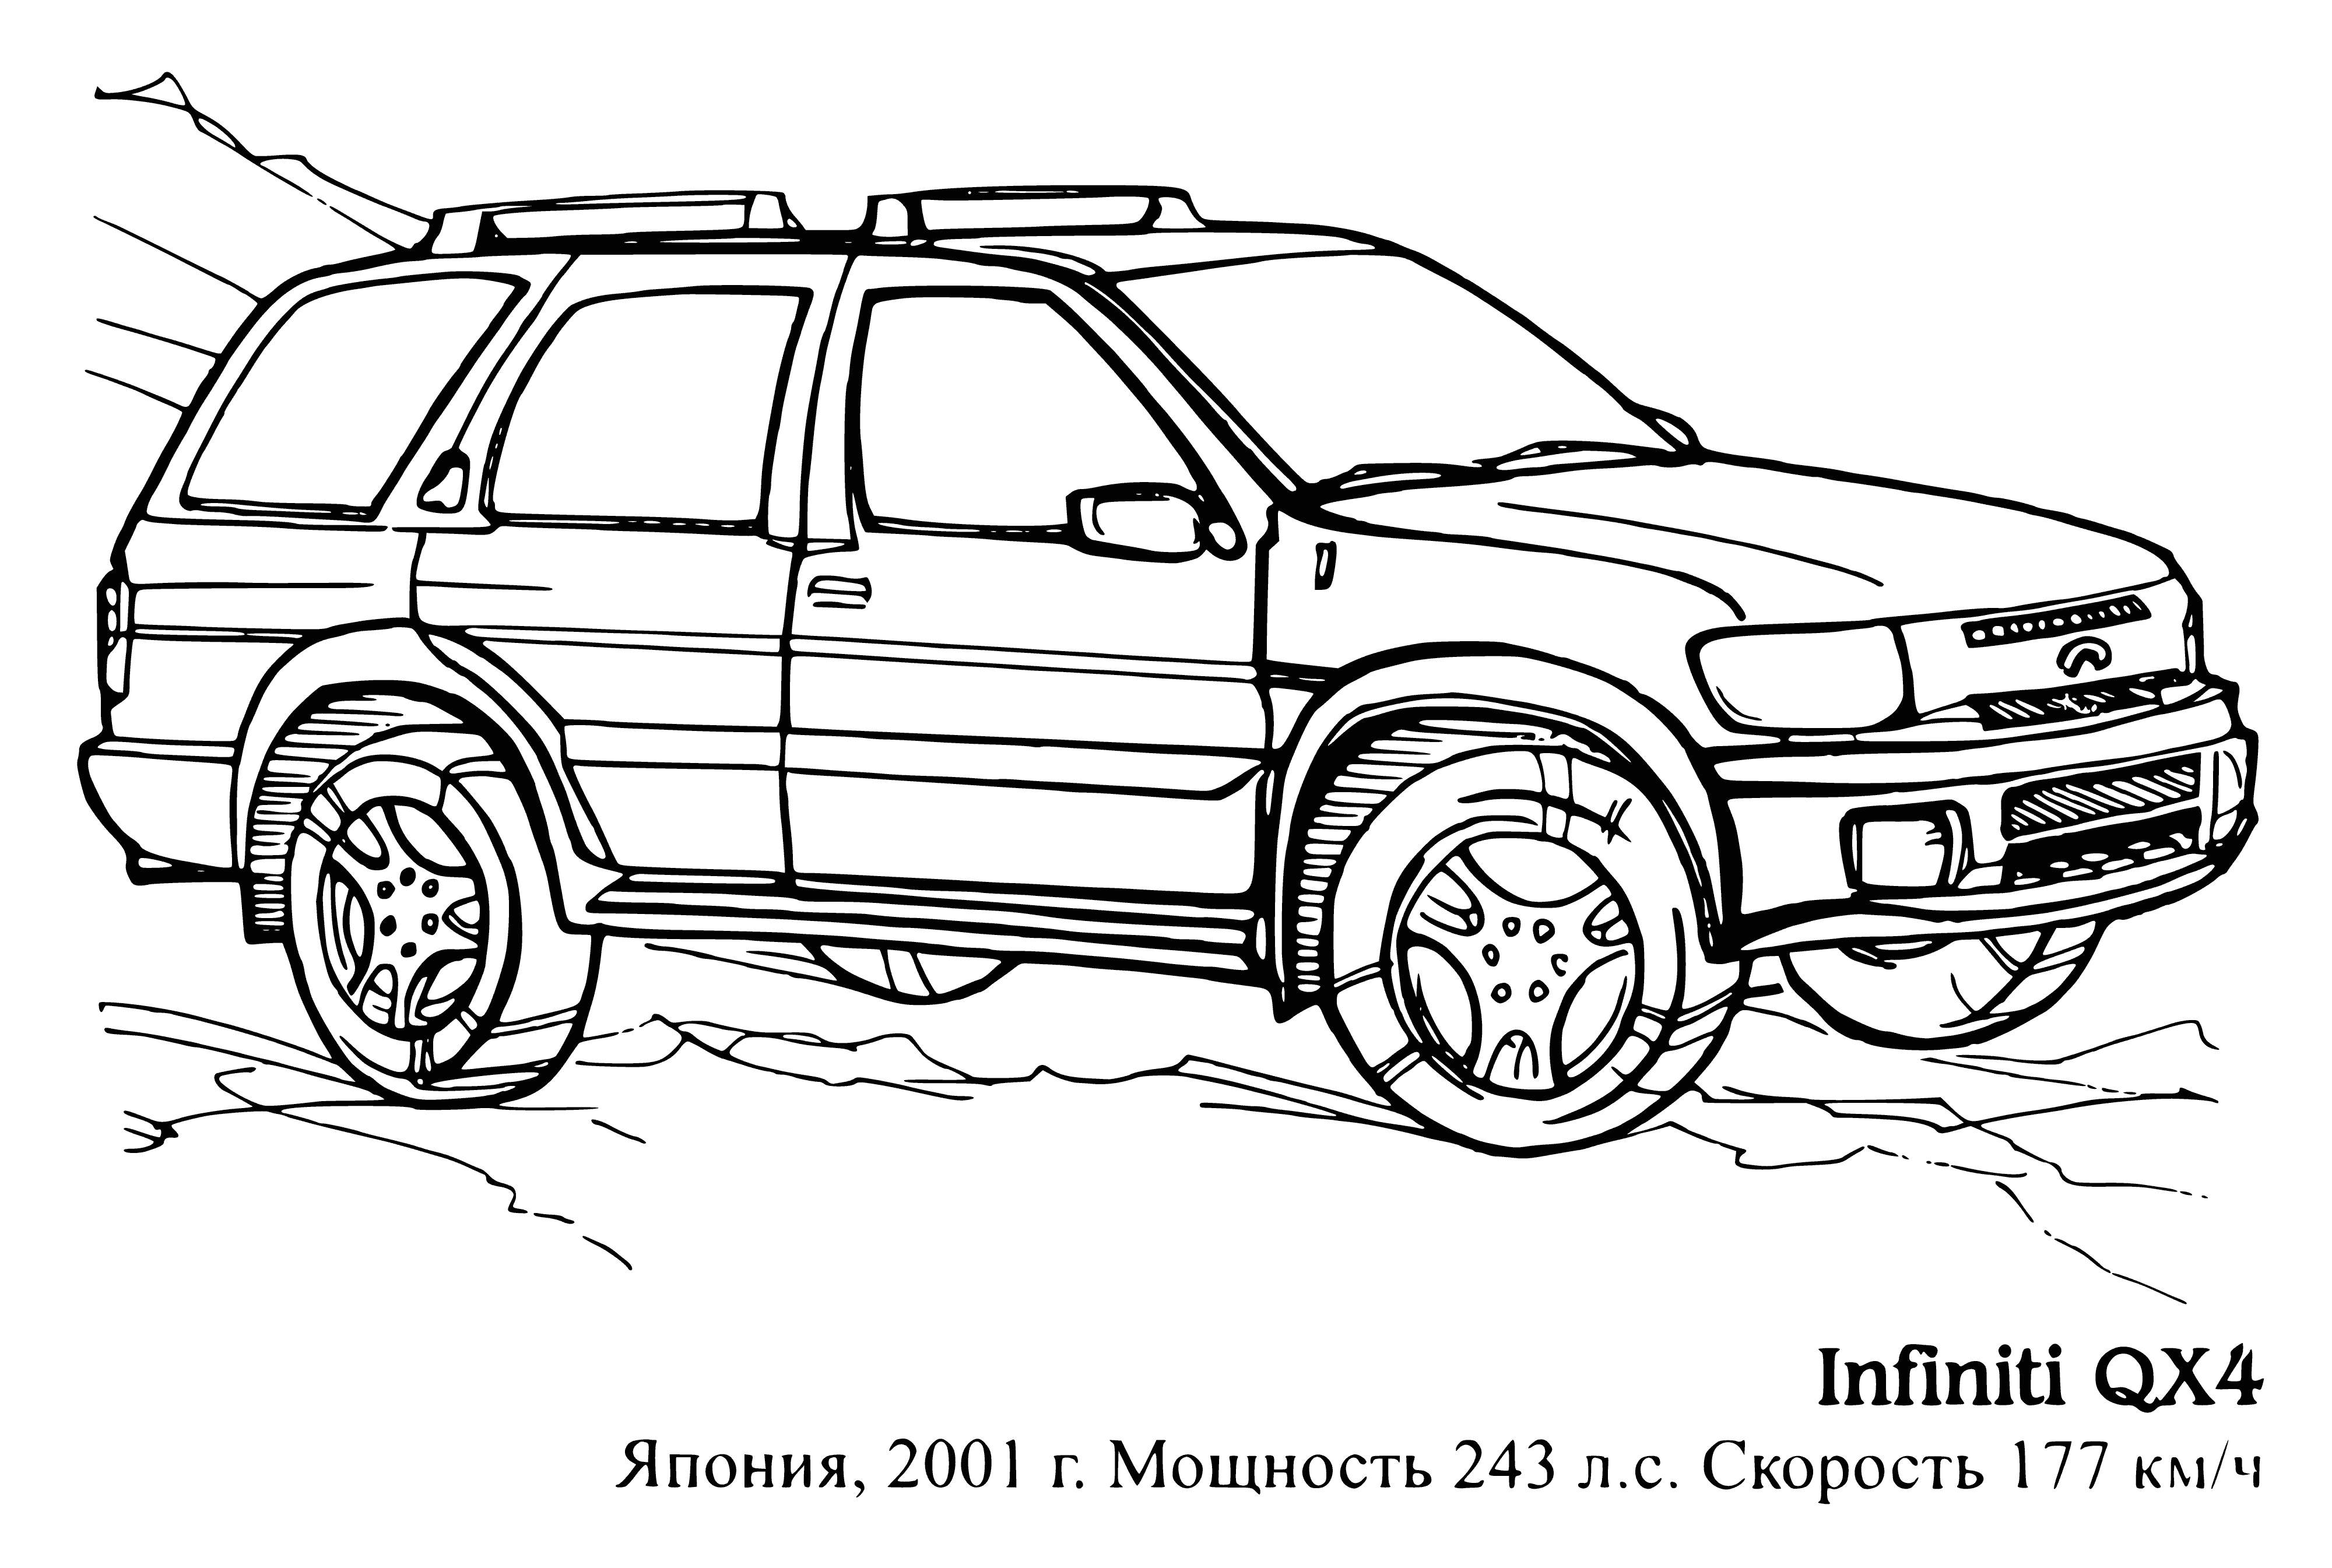 Infiniti QX4 coloring page